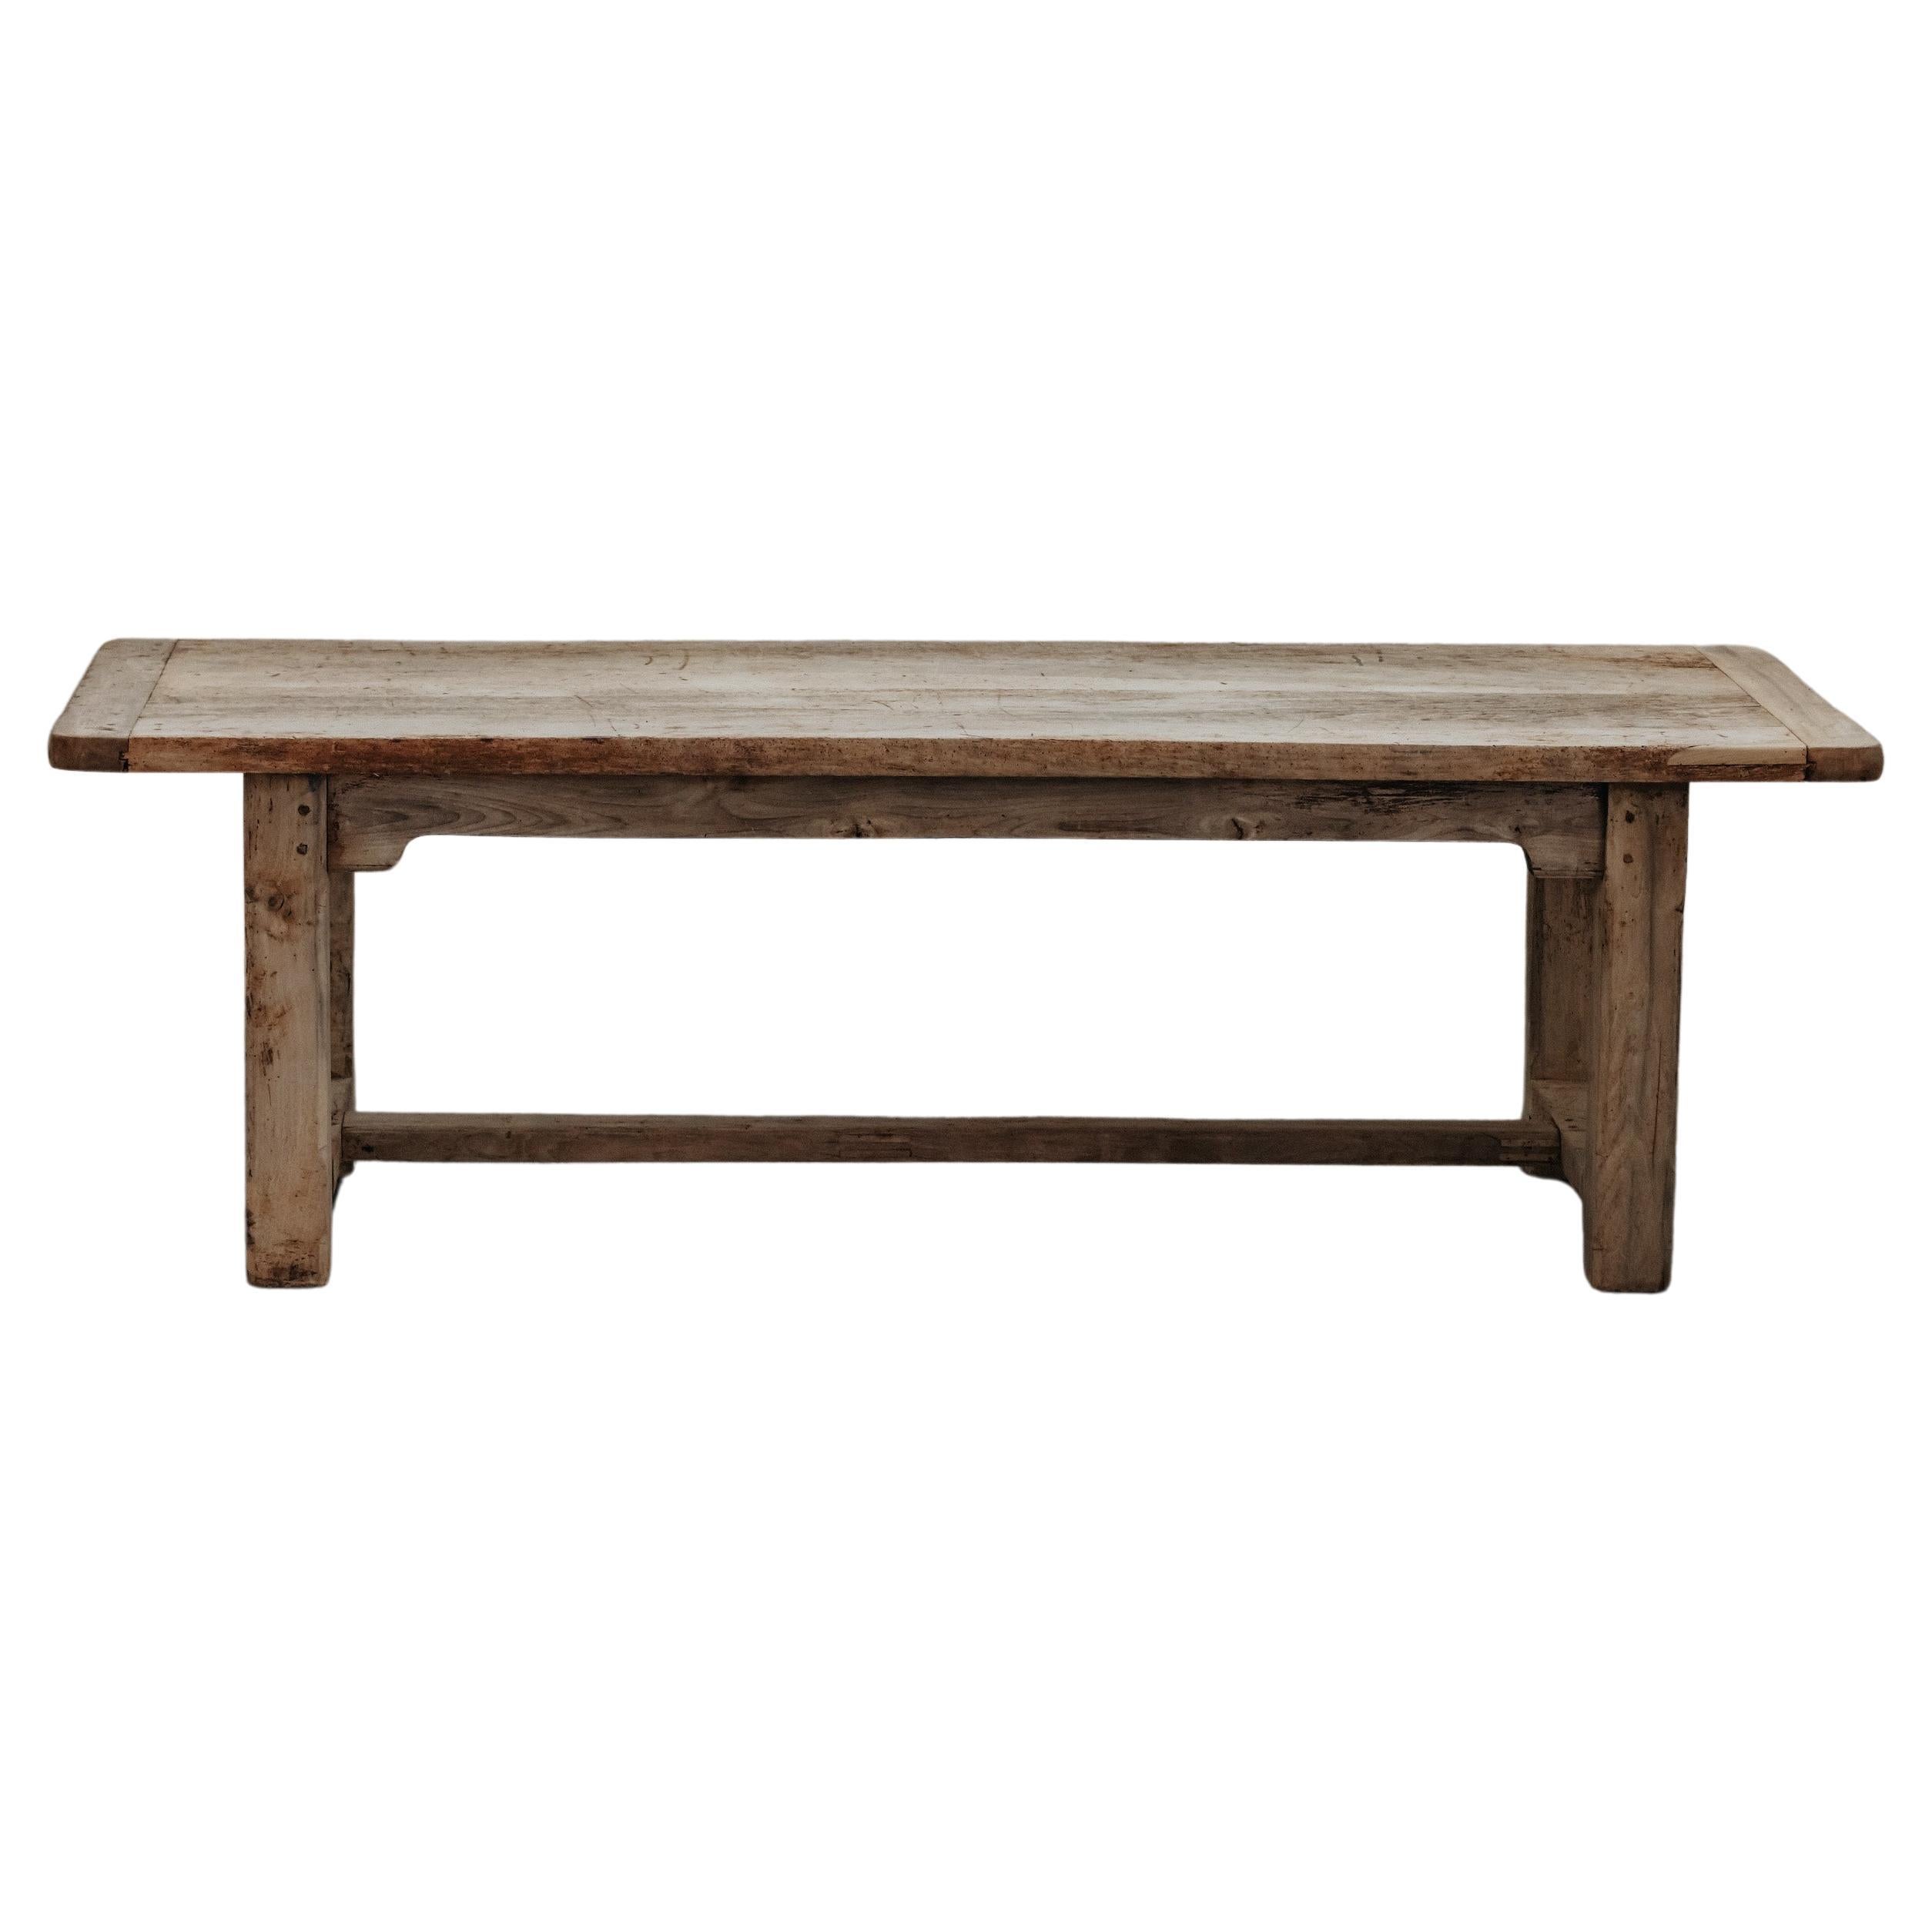 Early Oak Dining Table From Italy,  Circa 1850 For Sale